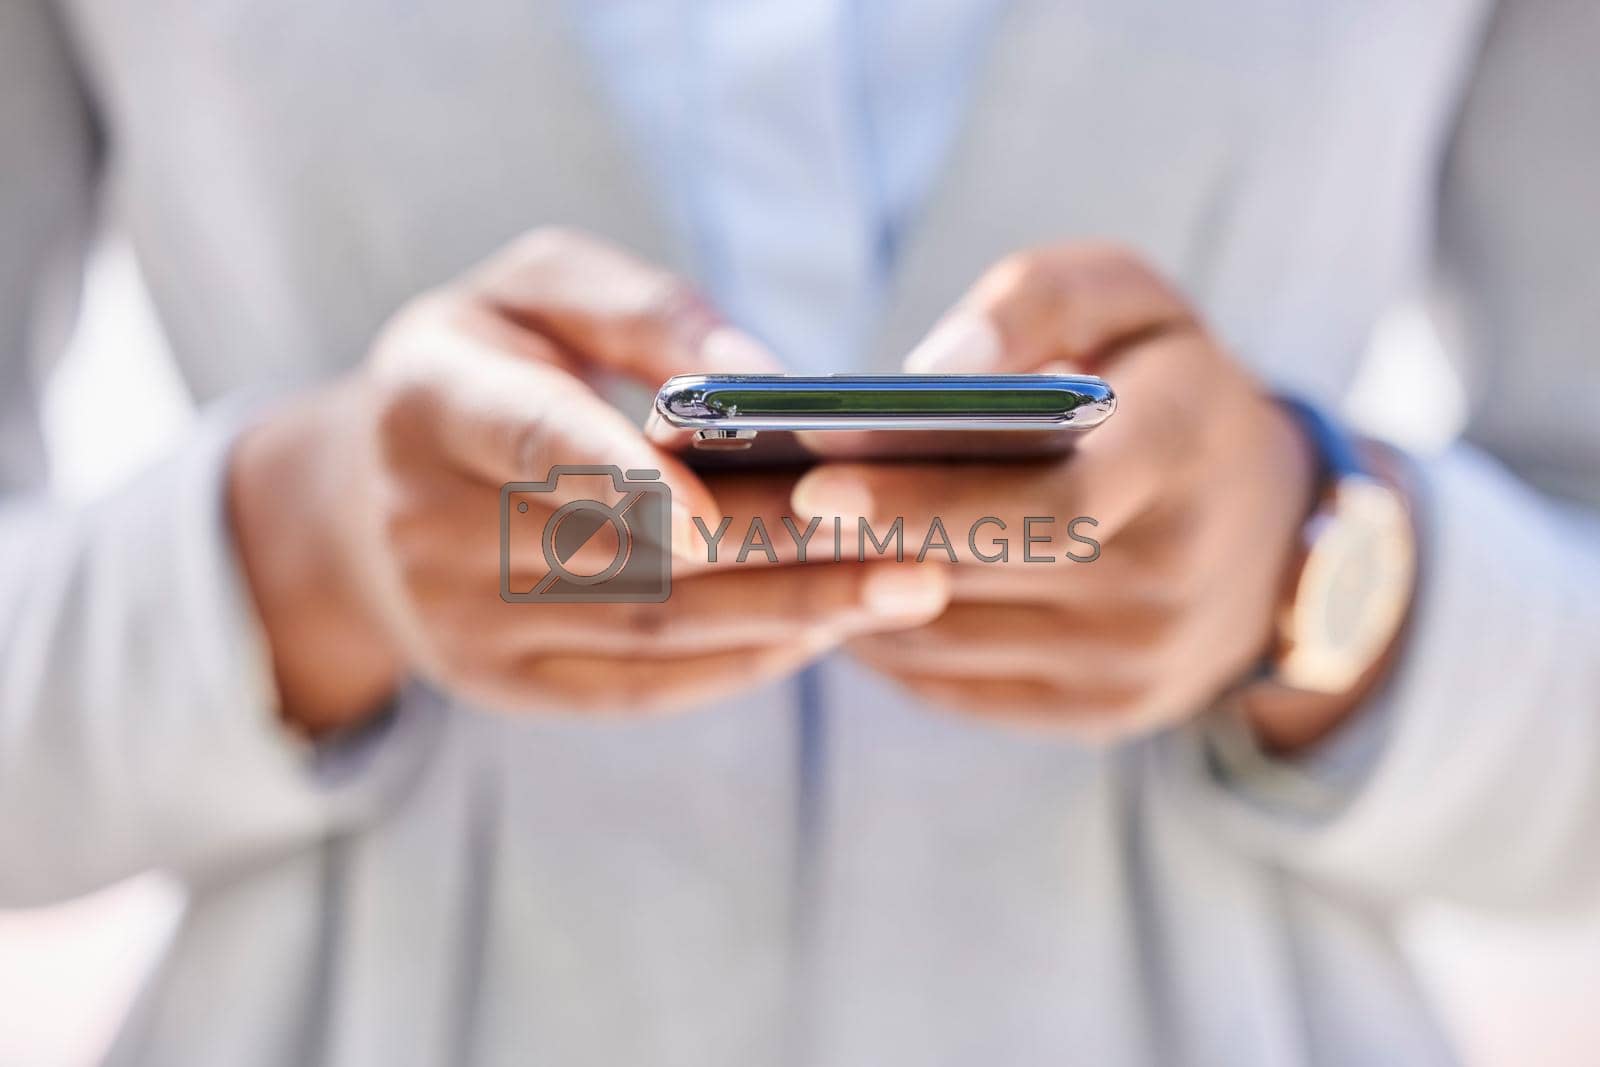 Online shopping, social media or ecommerce, a woman with a phone in her hands. A lady with a smartphone for email, work or a mobile game app. Technology, communication and worldwide internet contact